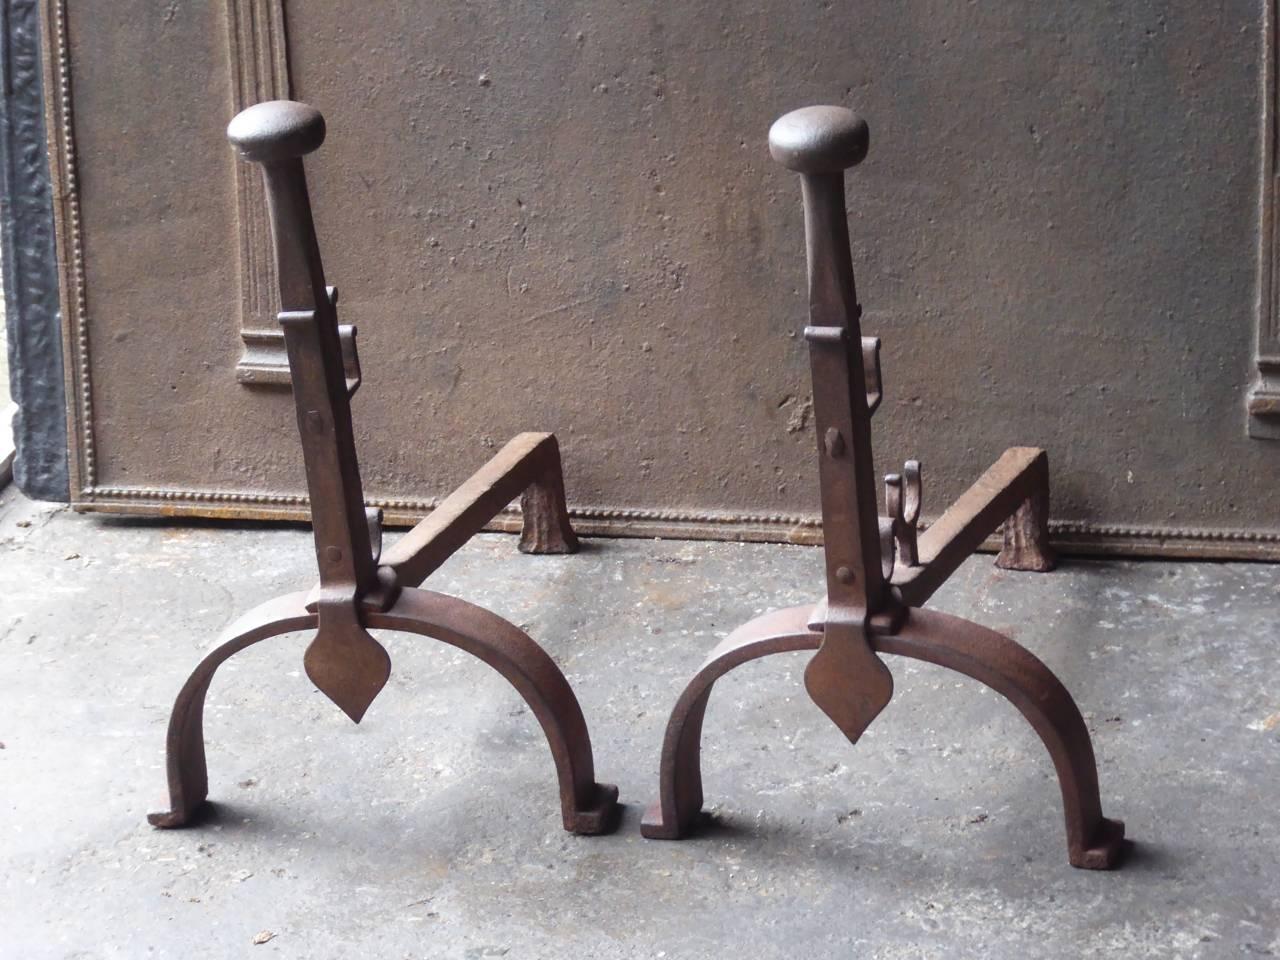 19th century French Napoleon III period firedogs made of wrought iron. The andirons have spit hooks to grill food. The condition is good.

